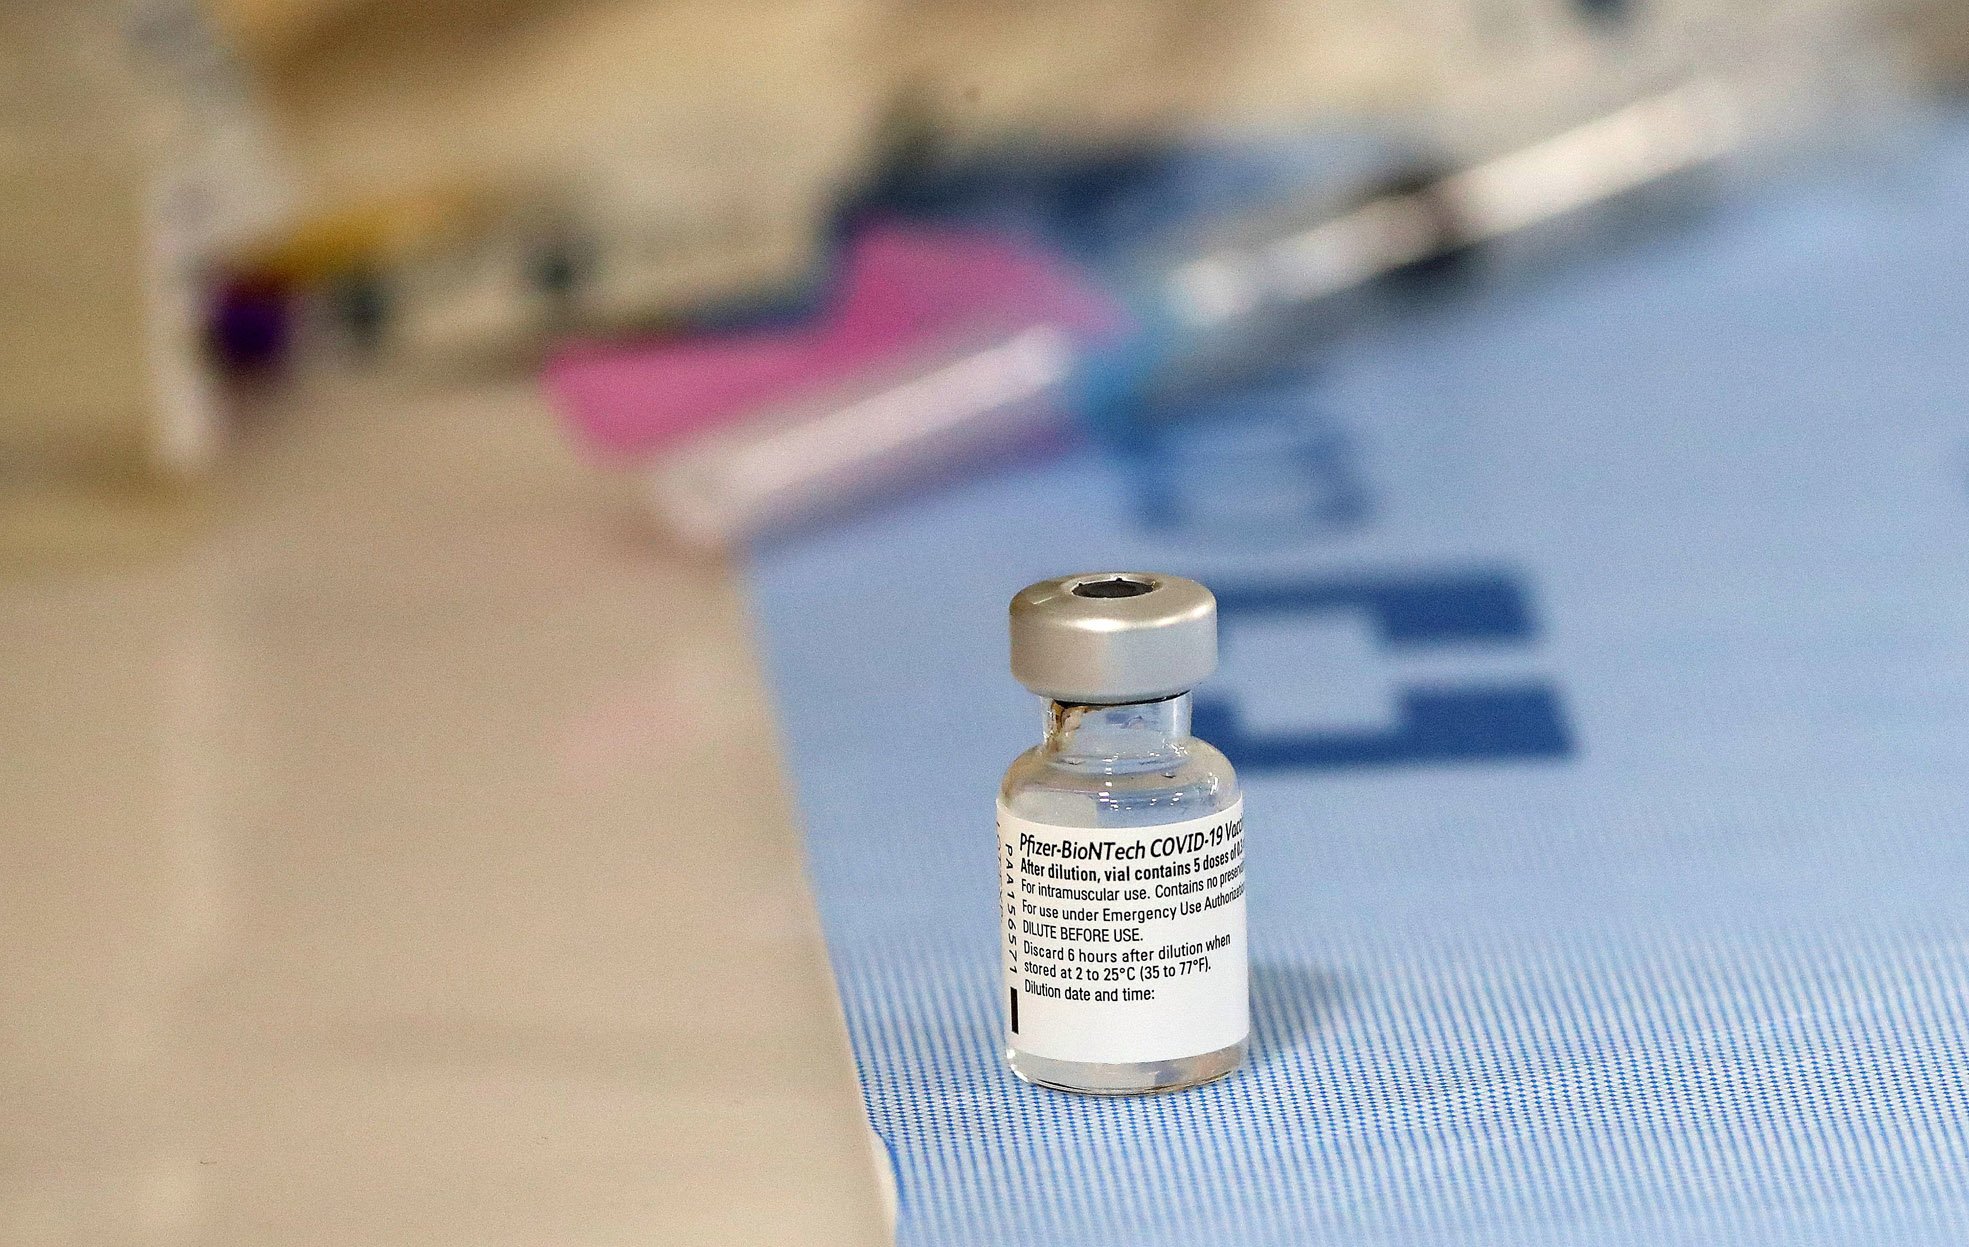 TDSB mandates COVID-19 vaccine for staff; termination a possibility for those who refuse